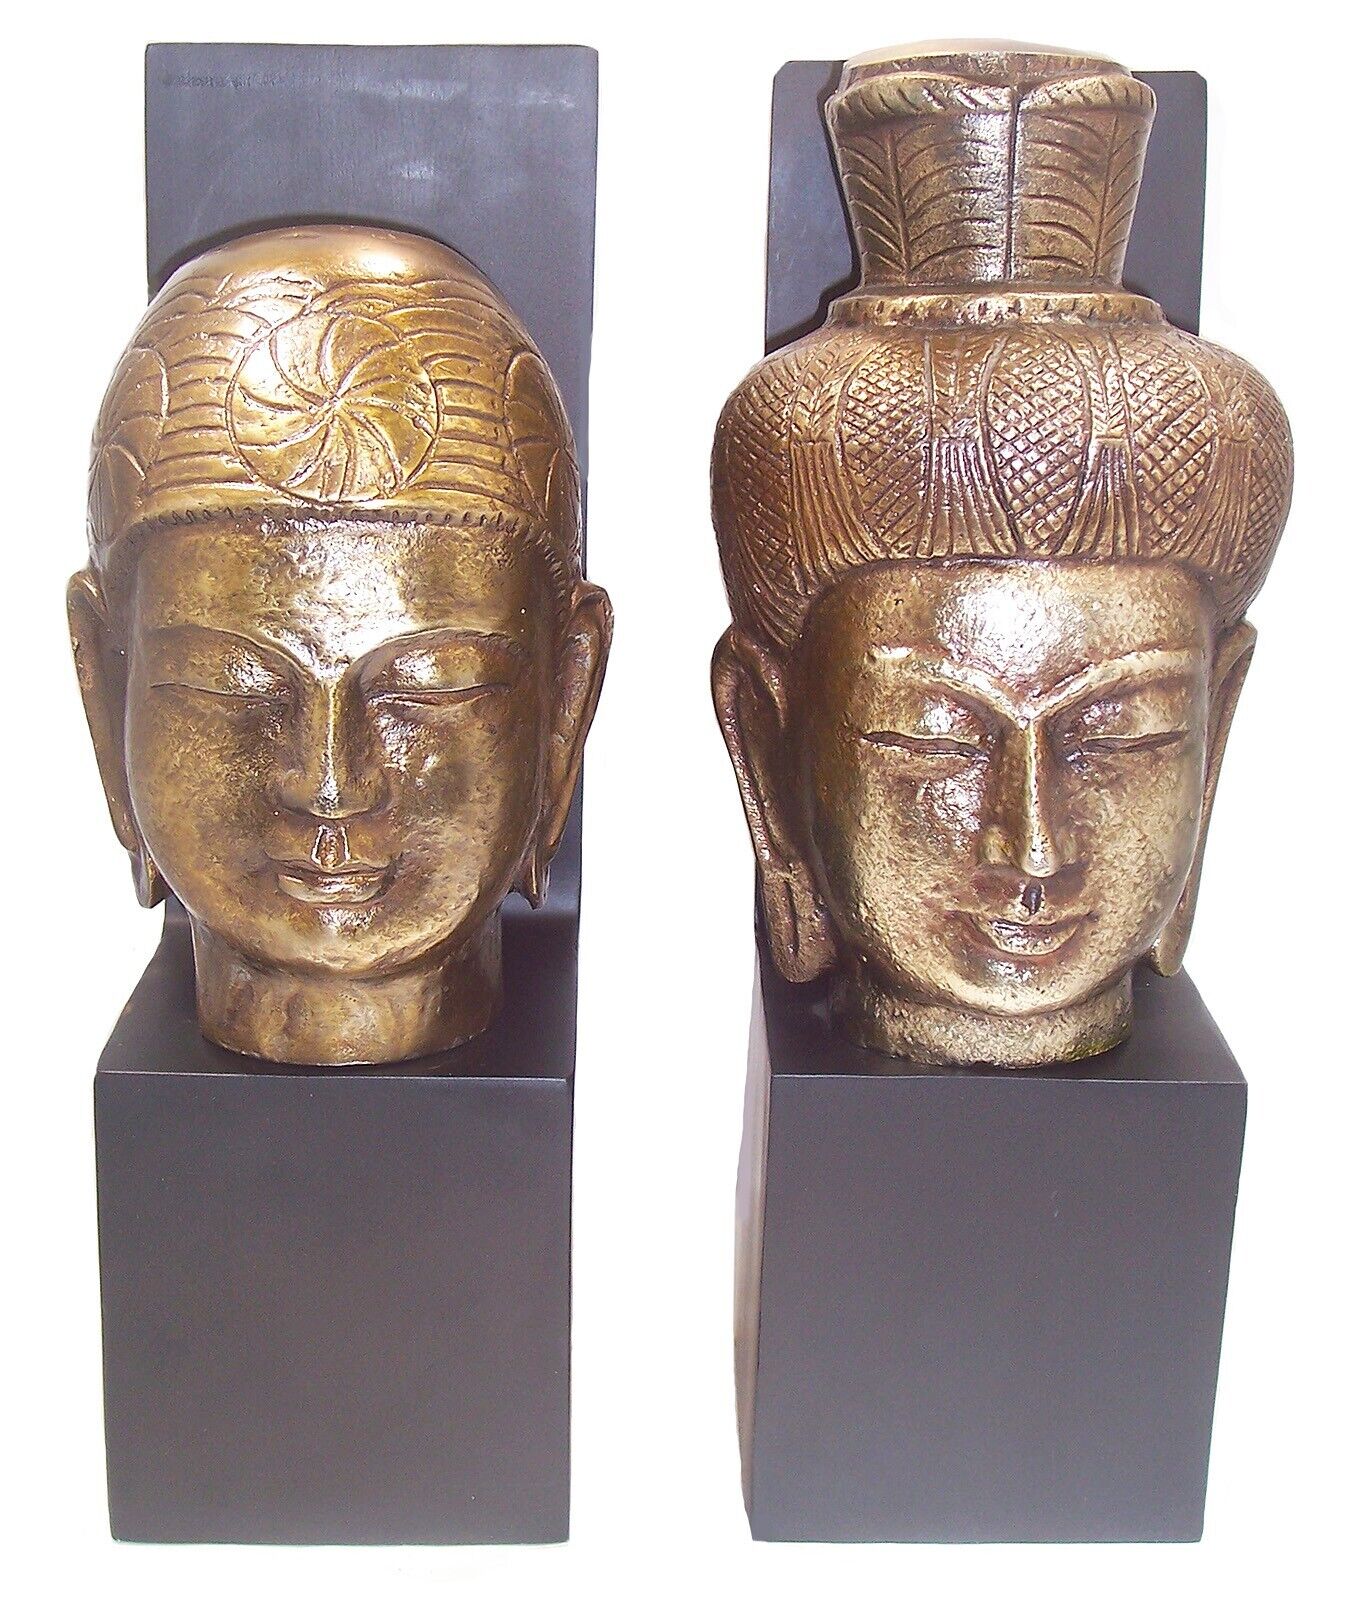 Set of 2 Bombay Company Metal Buddha Head Statues, Wall Art or Bookends 14” Tall